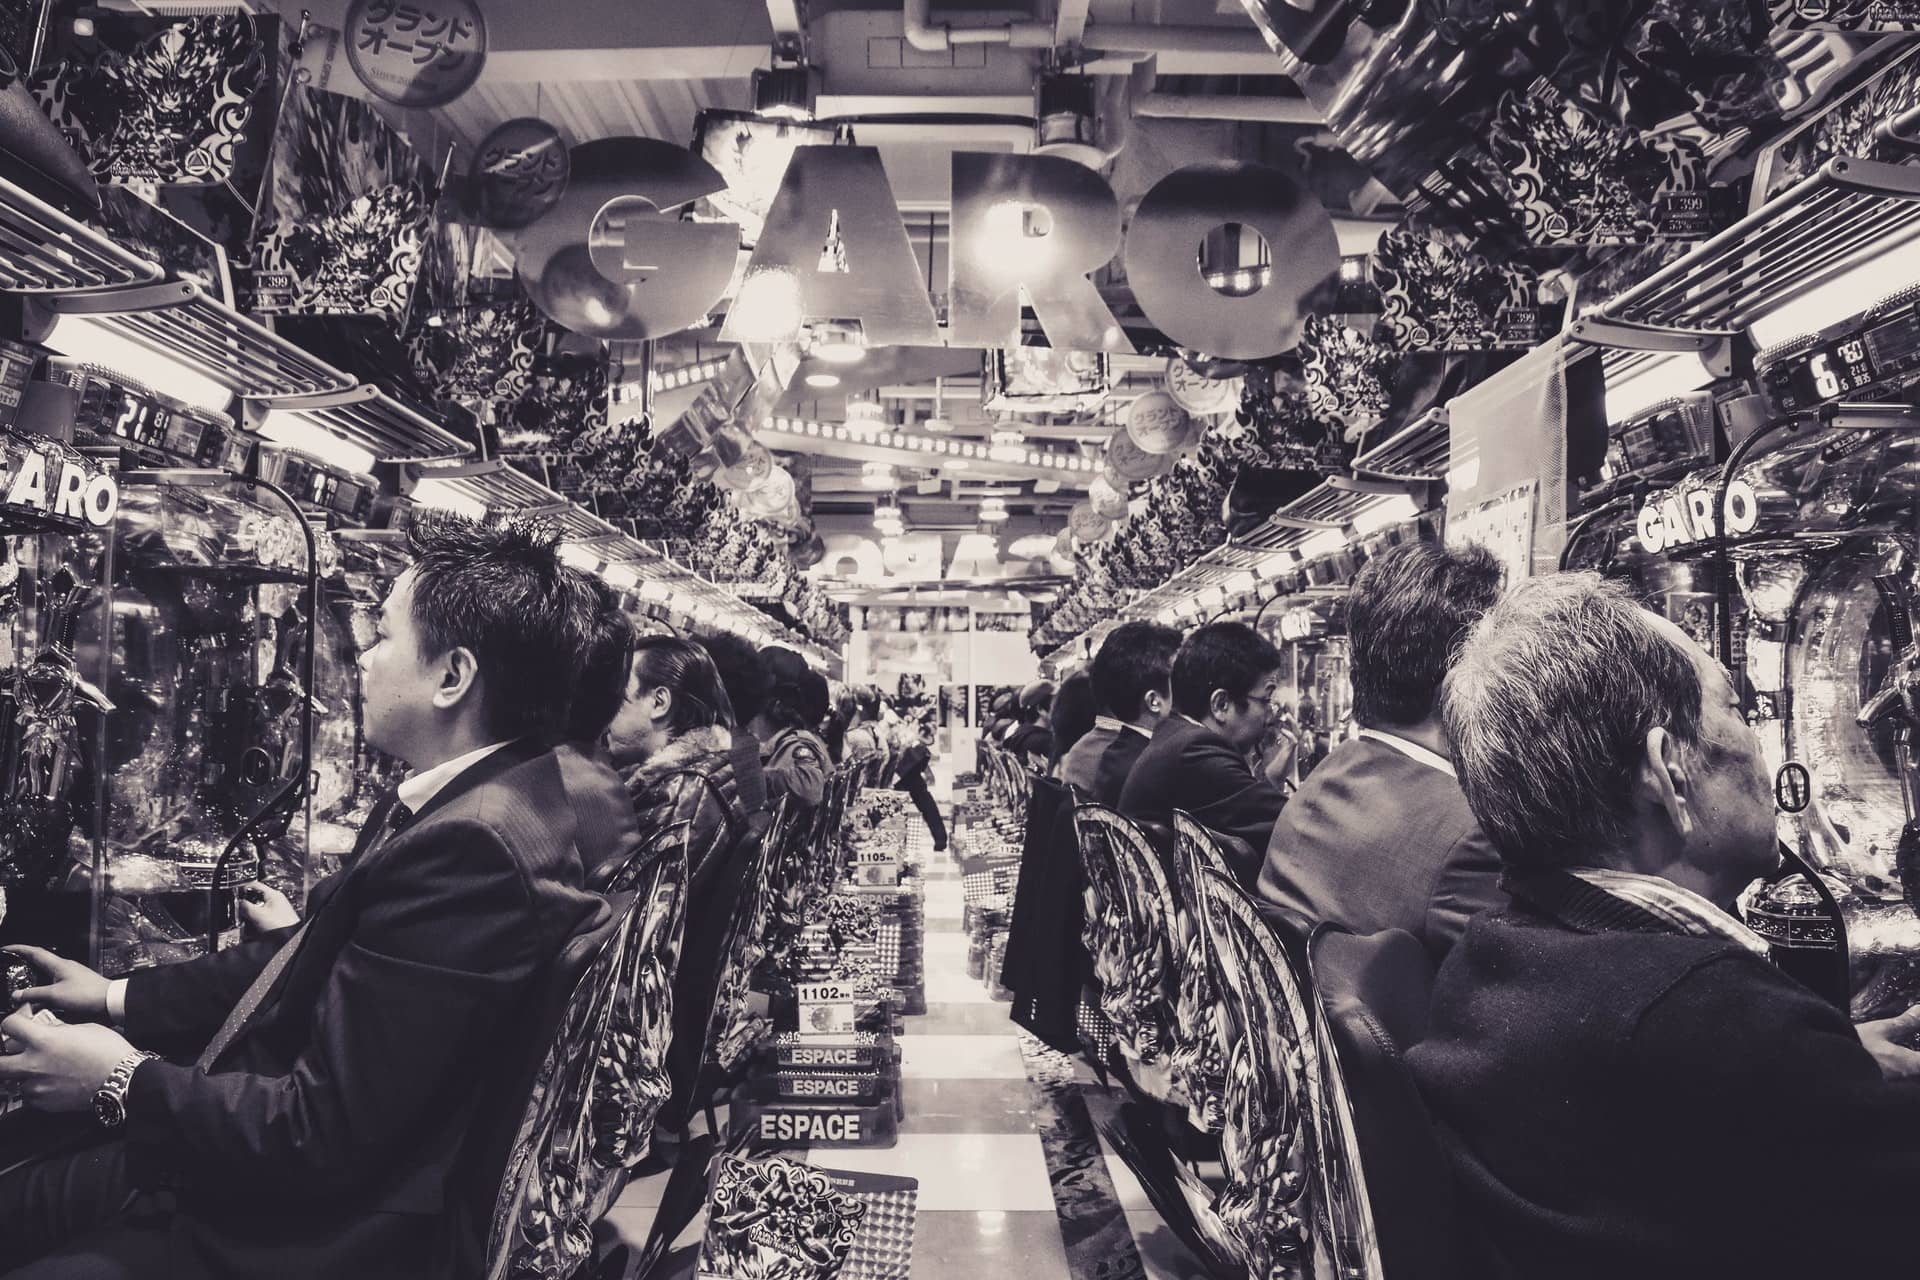 Pachinko Parlor In Japan